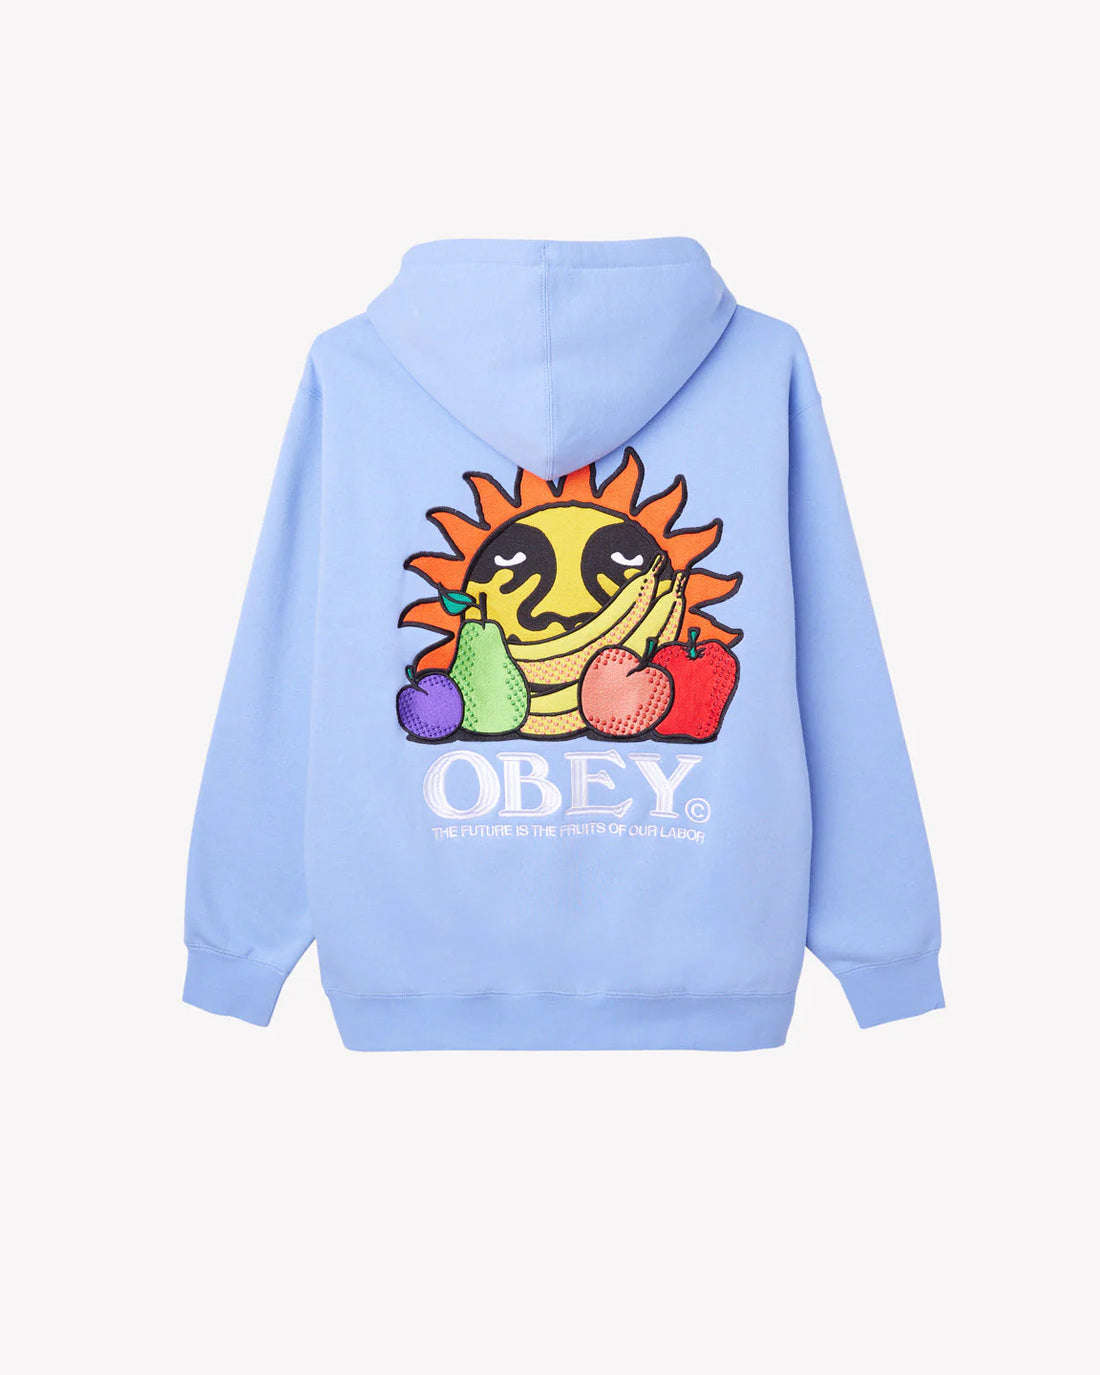 OBEY • Hoodie Our labor